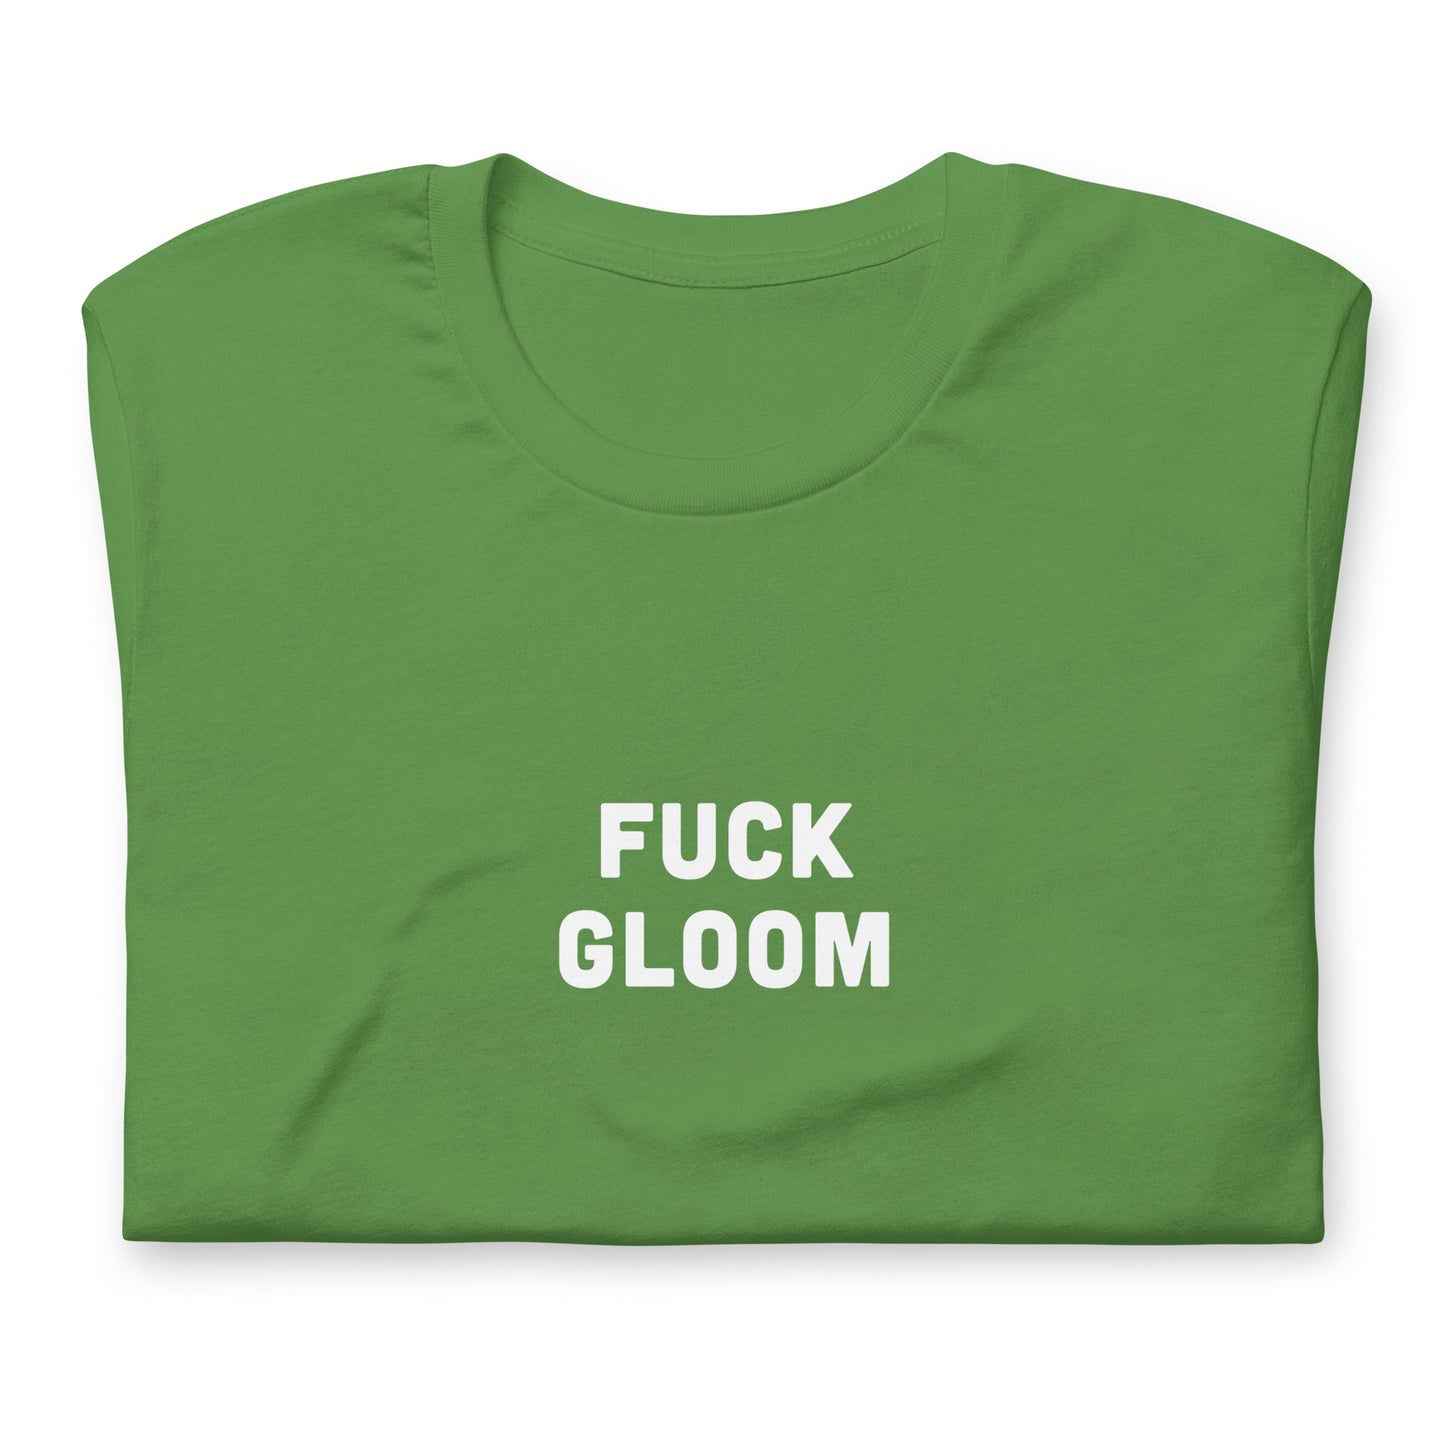 Fuck Gloom T-Shirt Size 2XL Color Navy